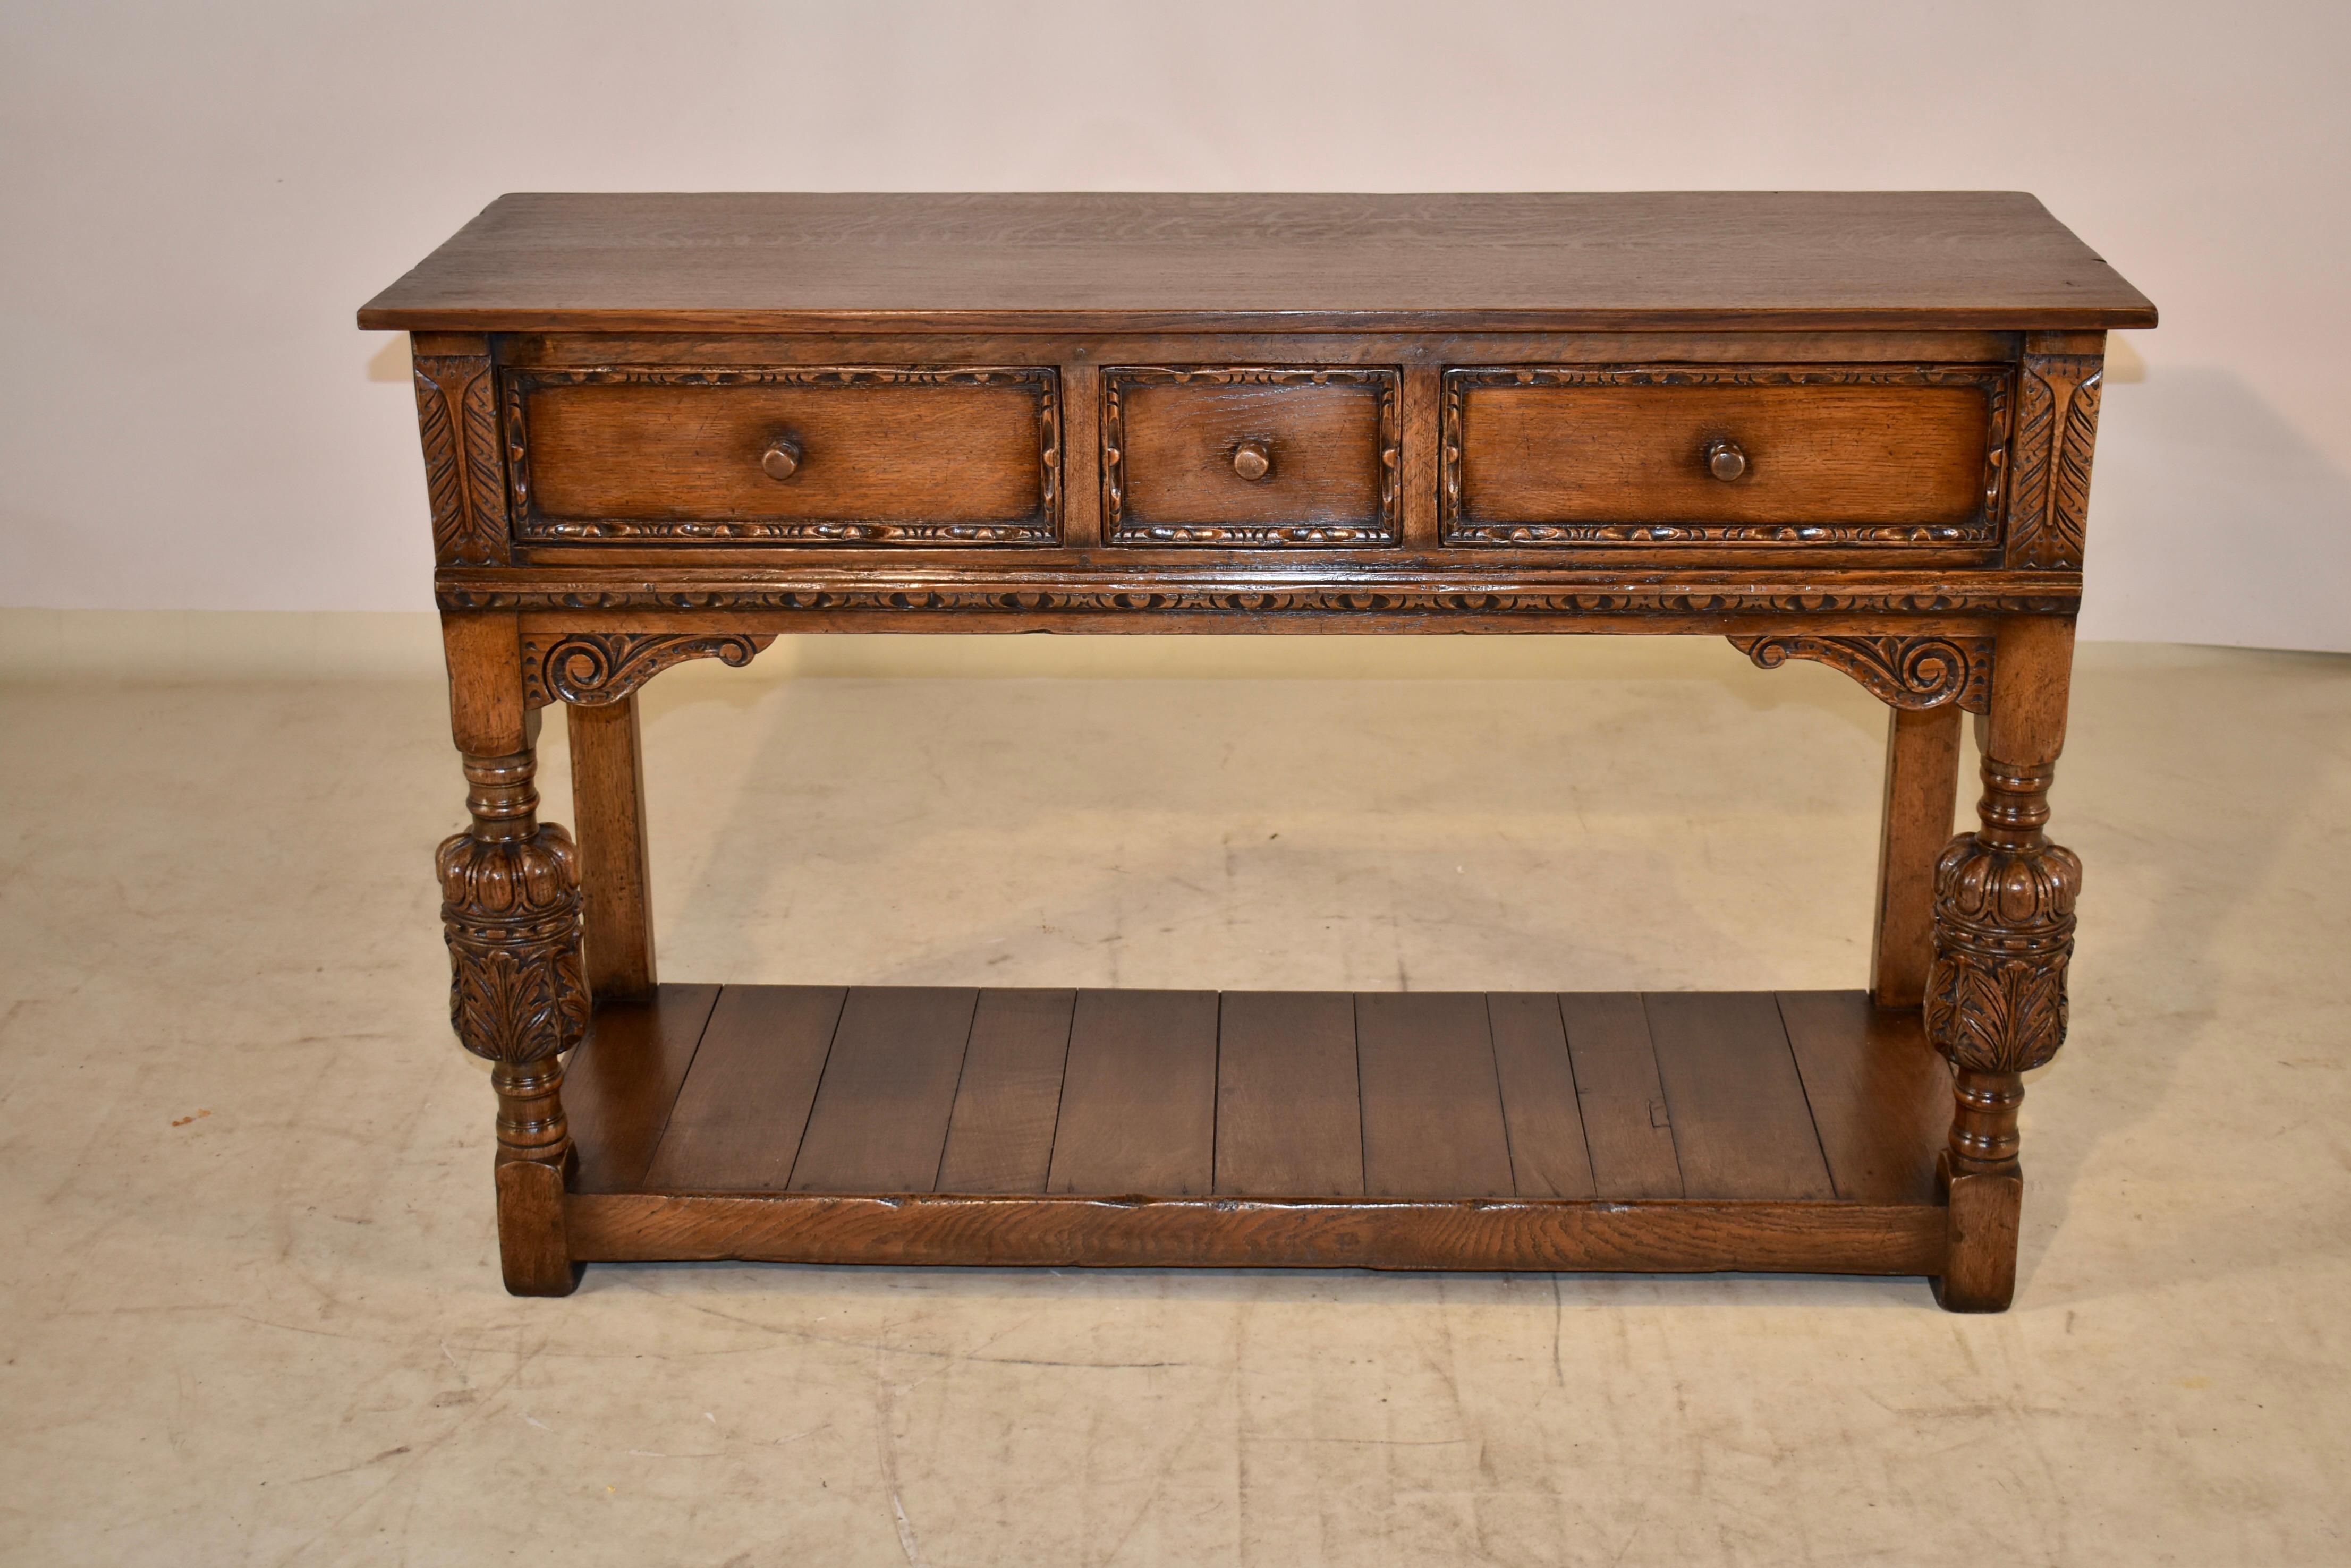 Late 19th century Ipswich oak pot board from England. The top is made from two boards, and follows down to paneled sides and three drawers in the front. The drawer fronts are all carved molded for added depth and design detail. The piece is